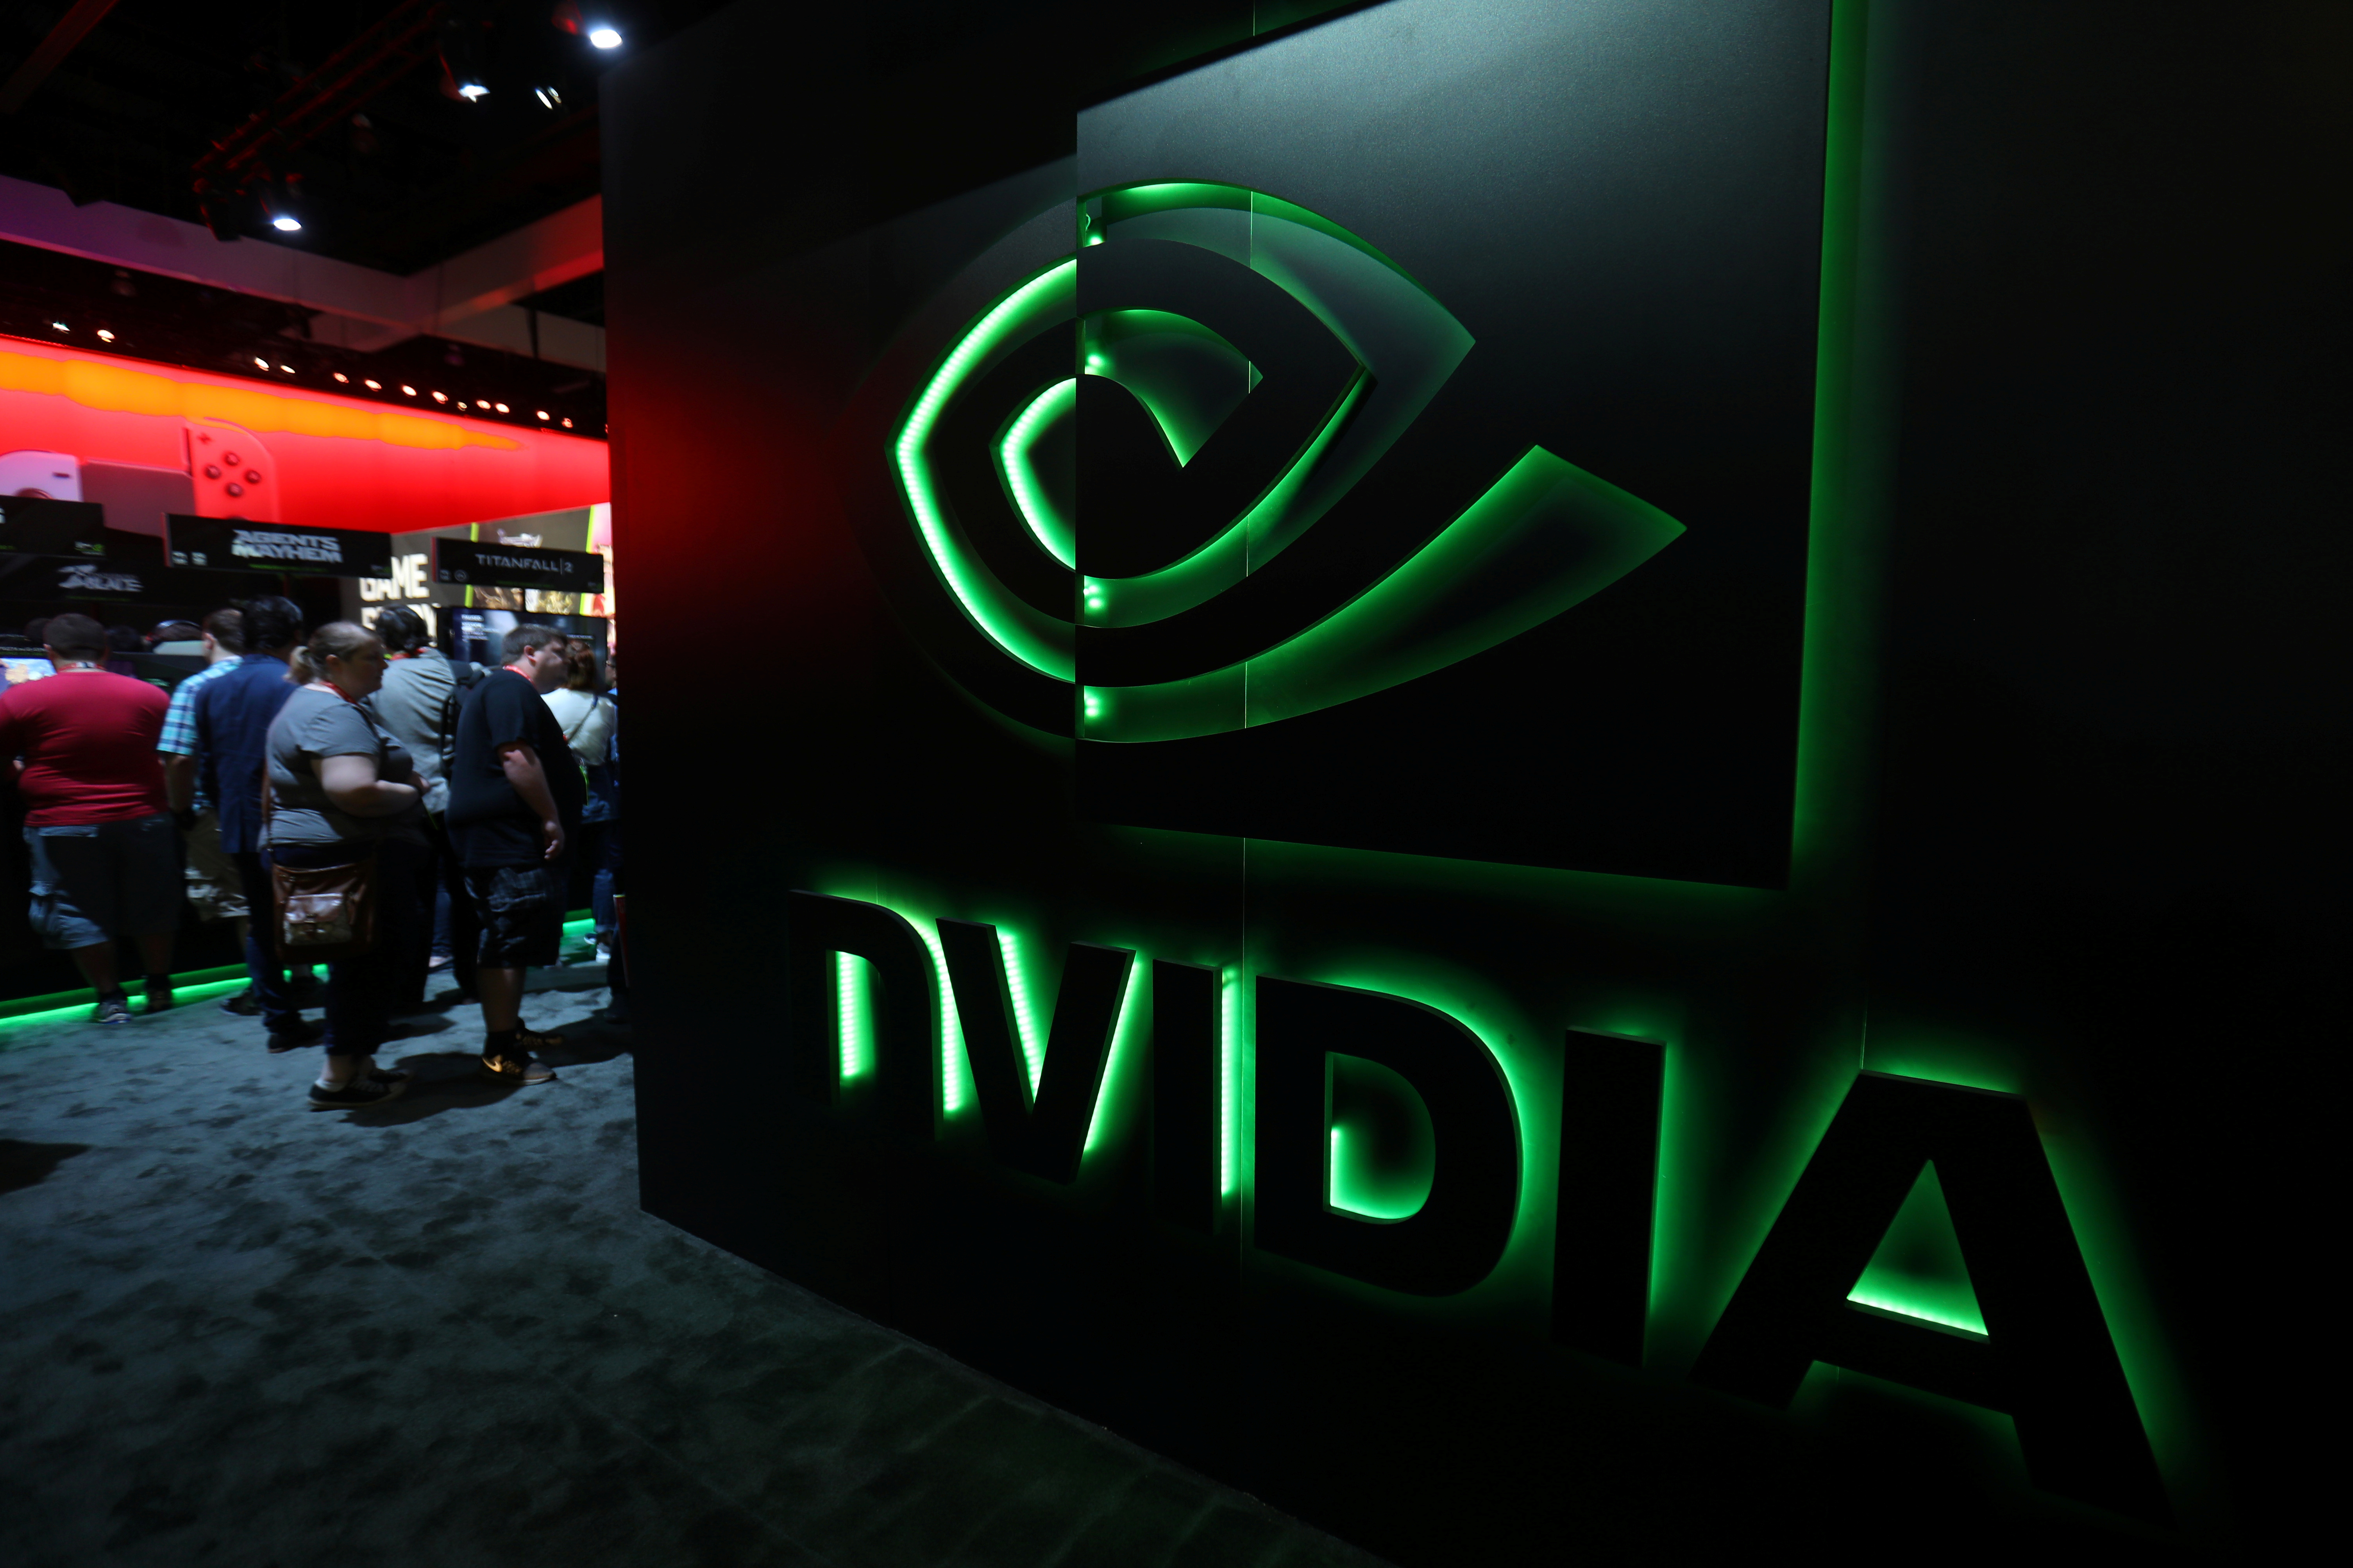 nVIDIA at the E3 2017 Electronic Entertainment Expo in Los Angeles